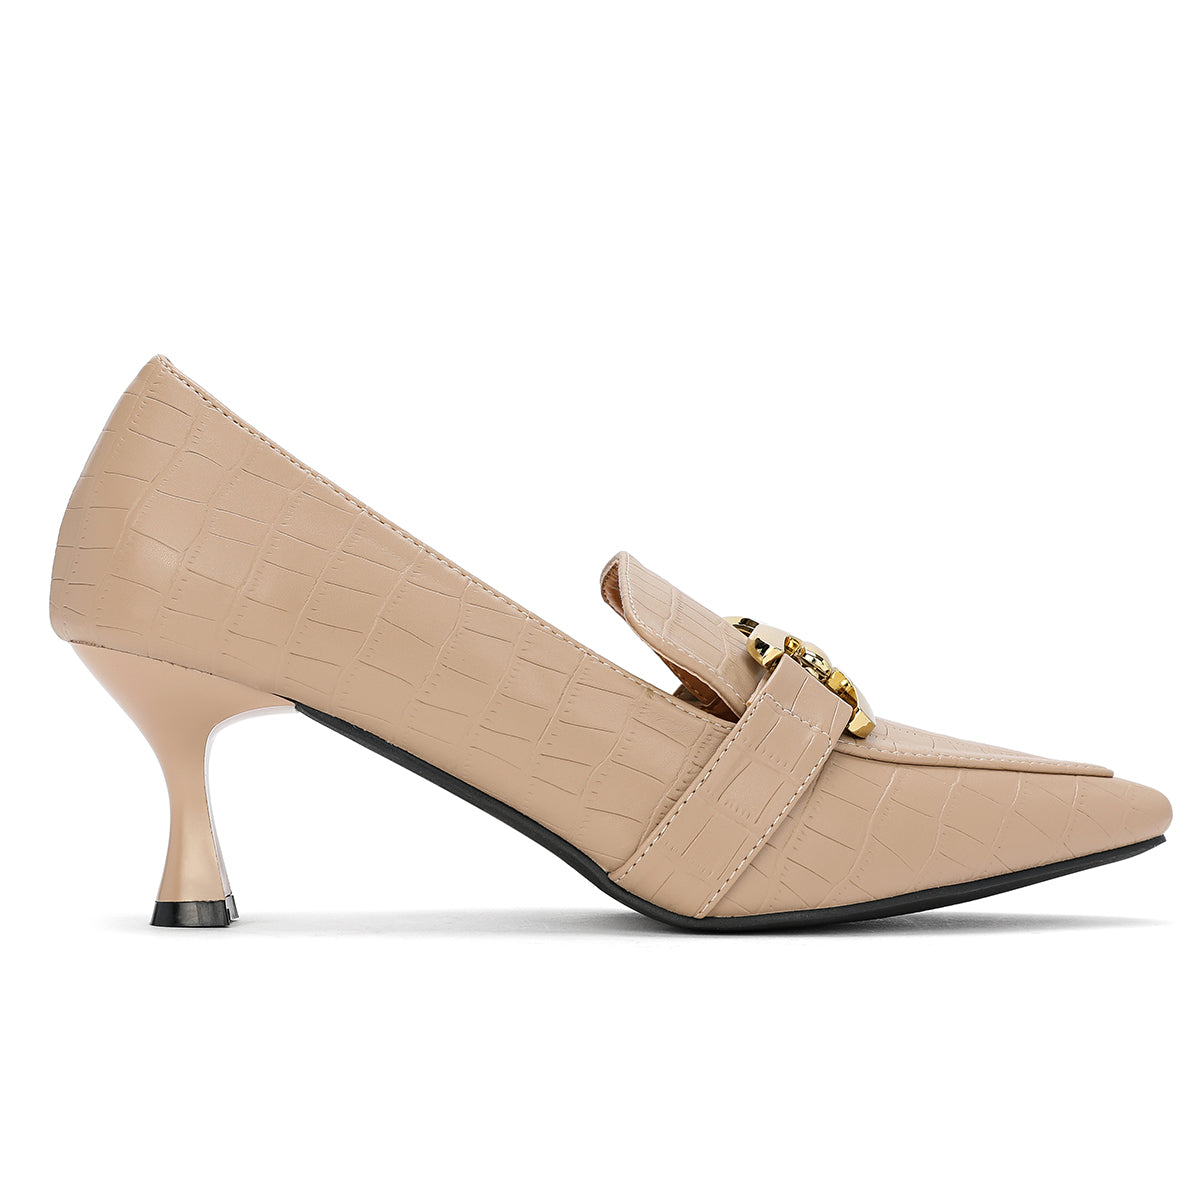 Elegant women's shoes with a high heel, beige color